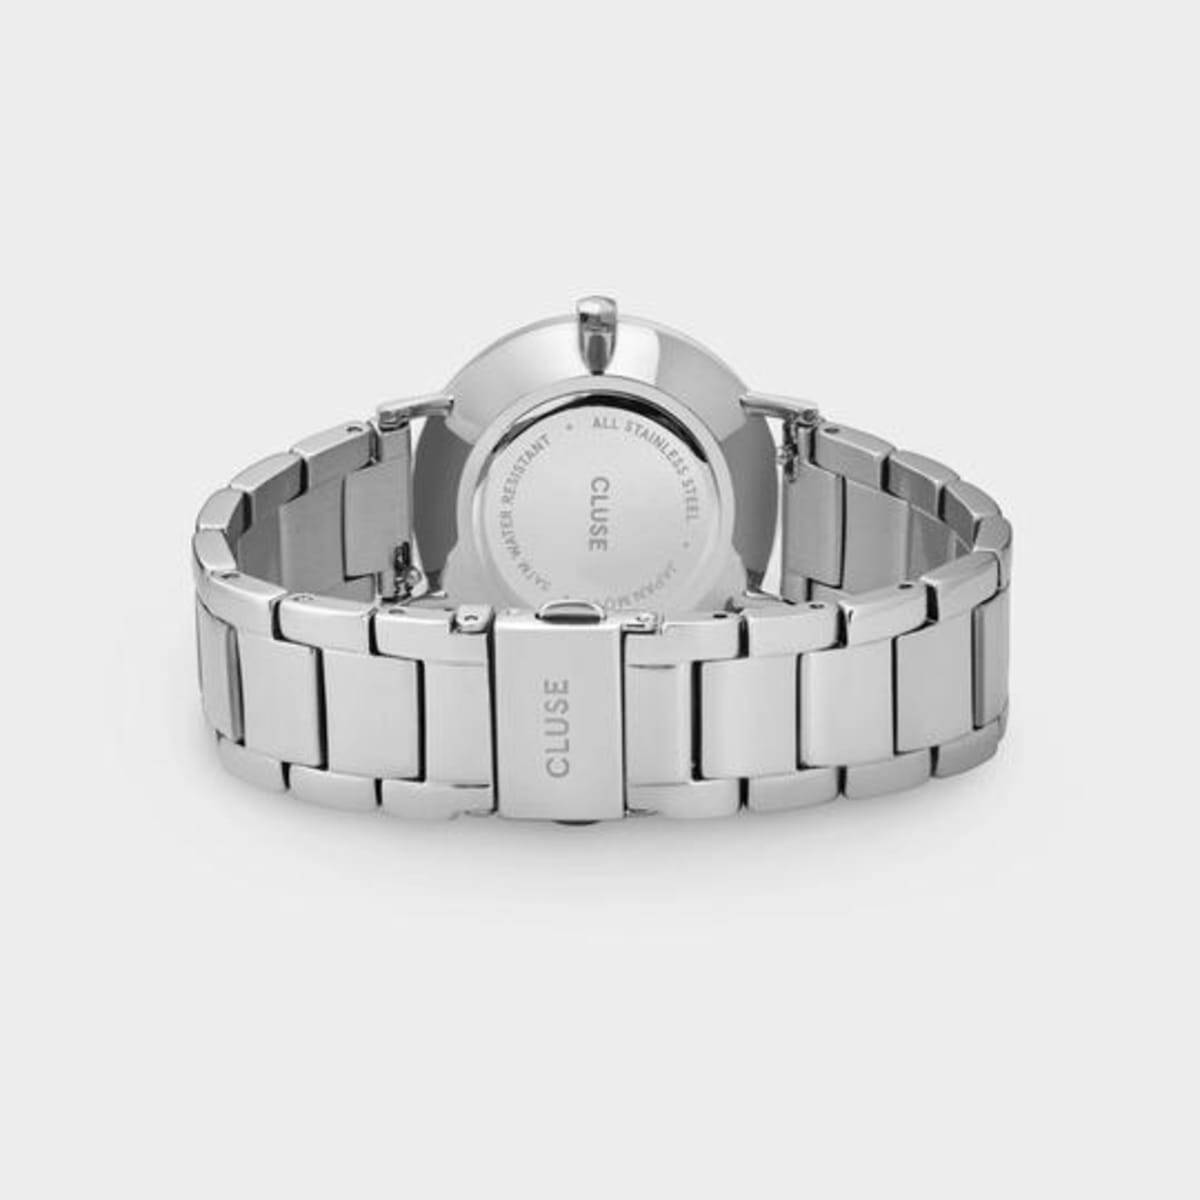 Cluse Orologio Donna Minuit 3-Link Silver White/Silver